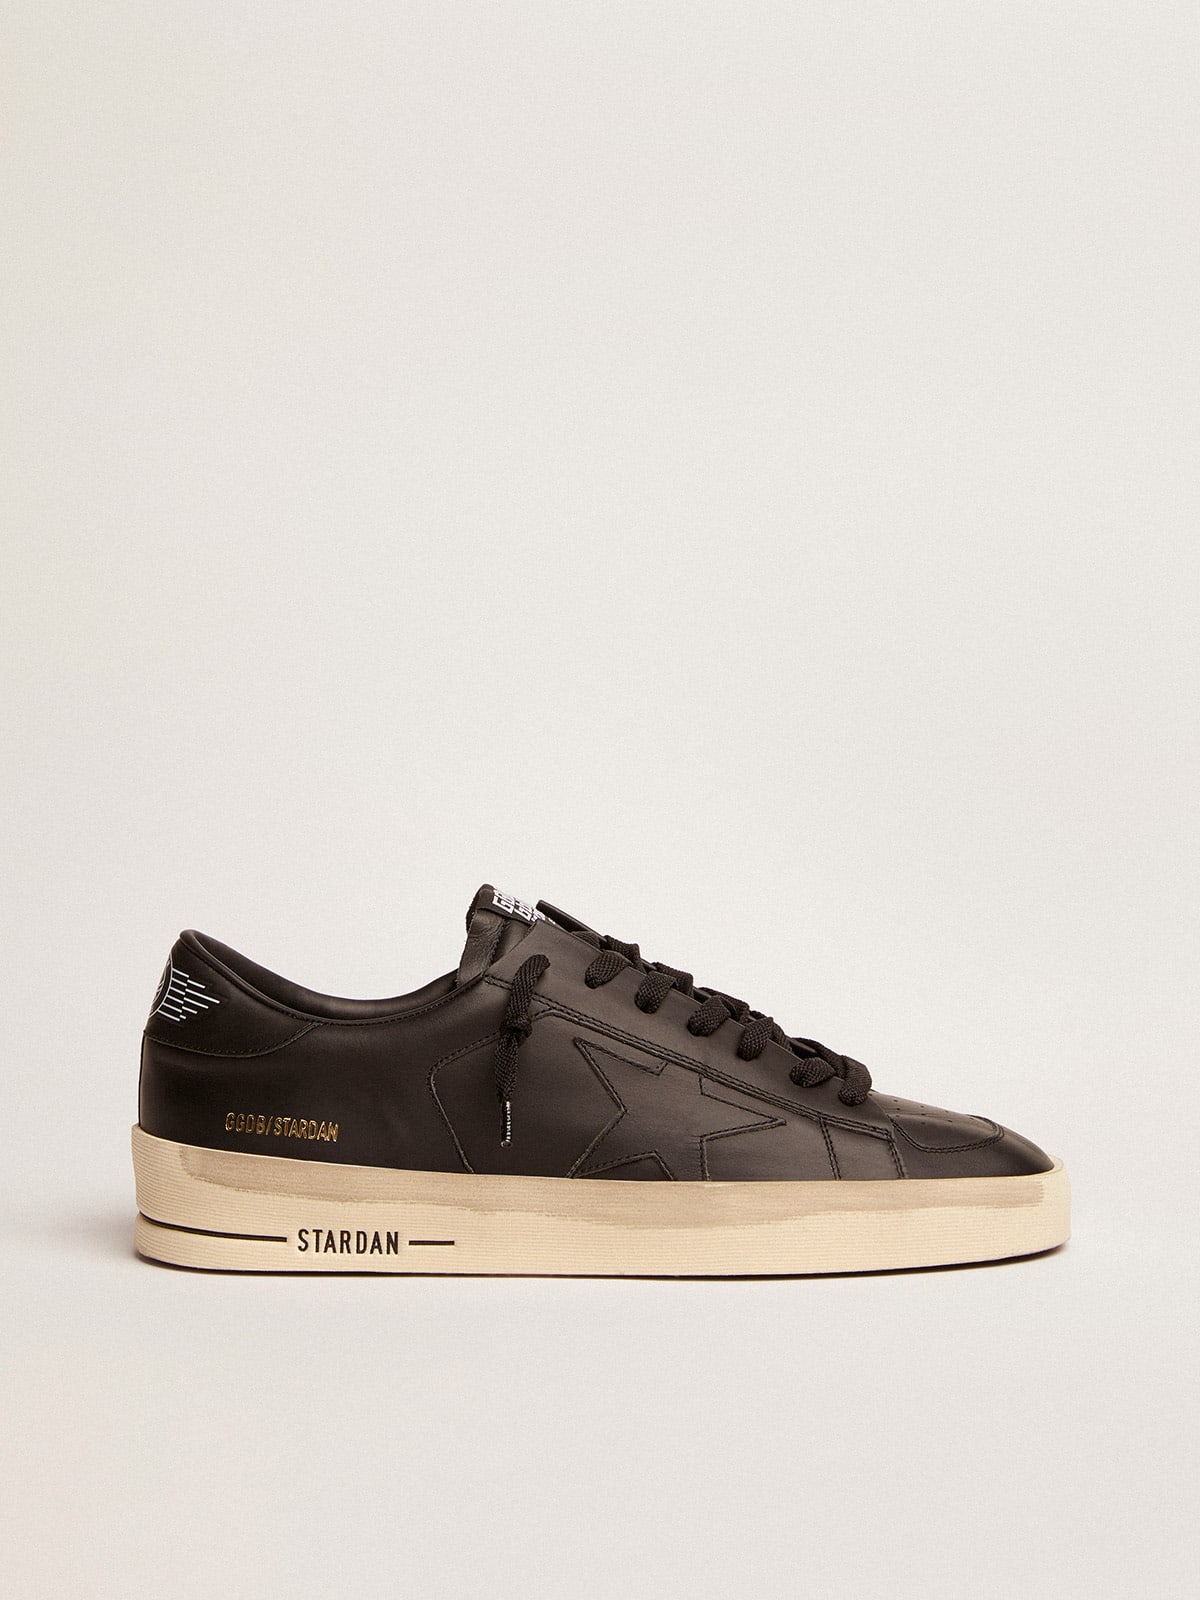 Stardan sneakers in total black leather with vintage finish